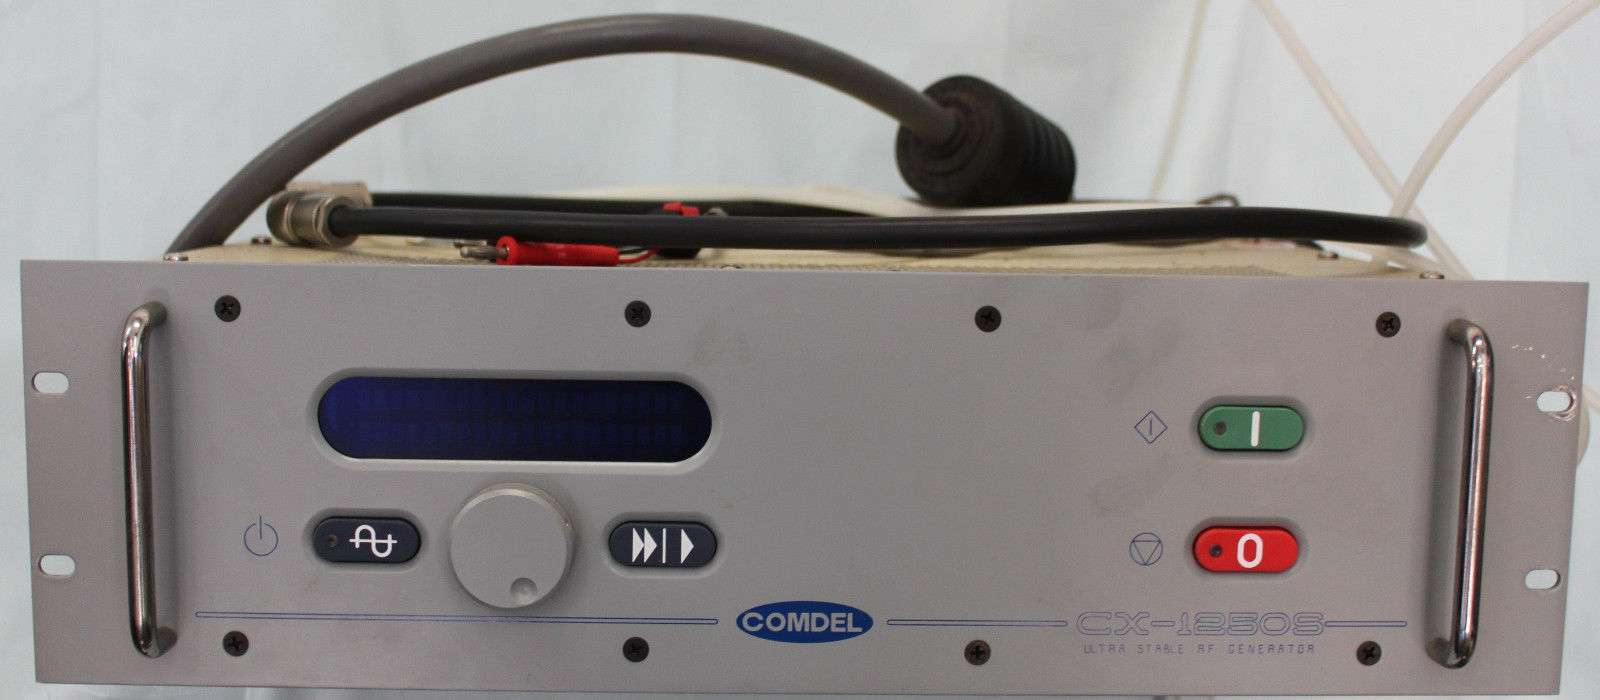 Comdel CX-1250S RF Generator, FP3214R1 Water-Cooled, 3 Phase, Tested & Working